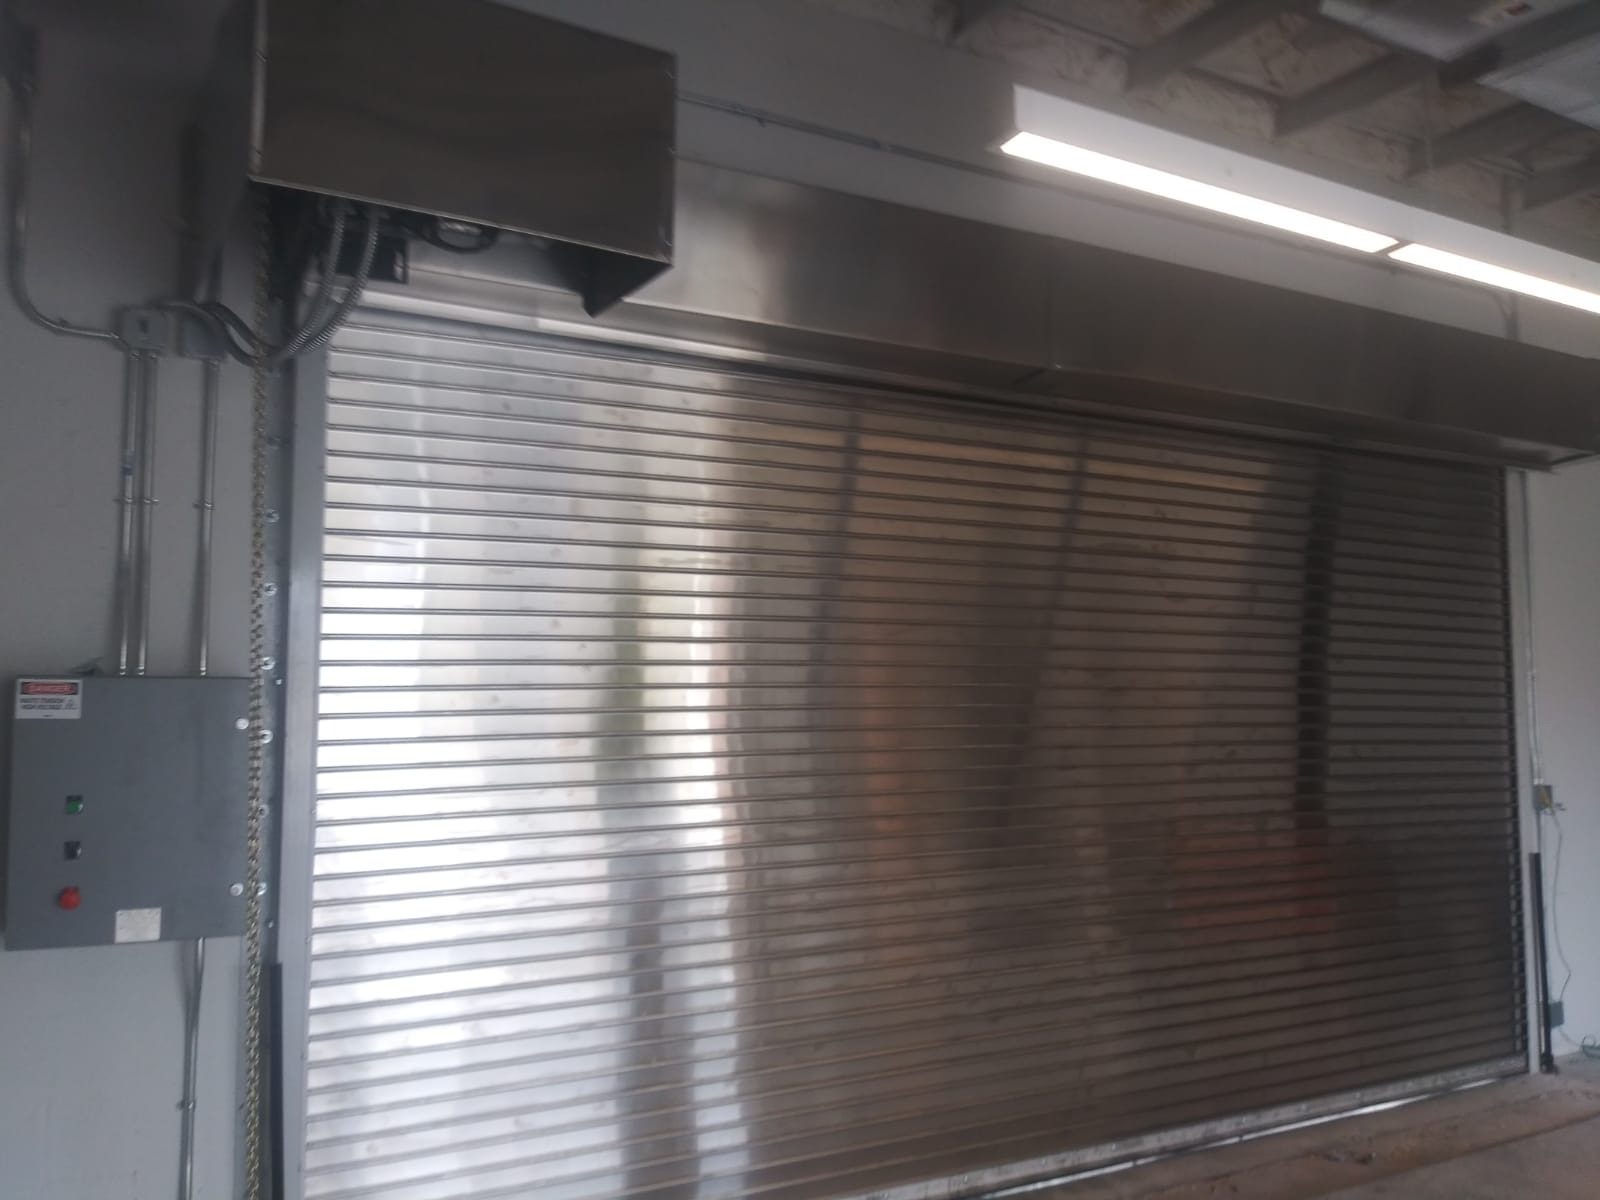 Our HP300 HIGH PERFORMANCE 300 Roll up Door is designed to work at high speed, great performance and longevity. Features a reliable springless roll up door that provide users a smooth and fast operation without sacrificing security, safety and durability.